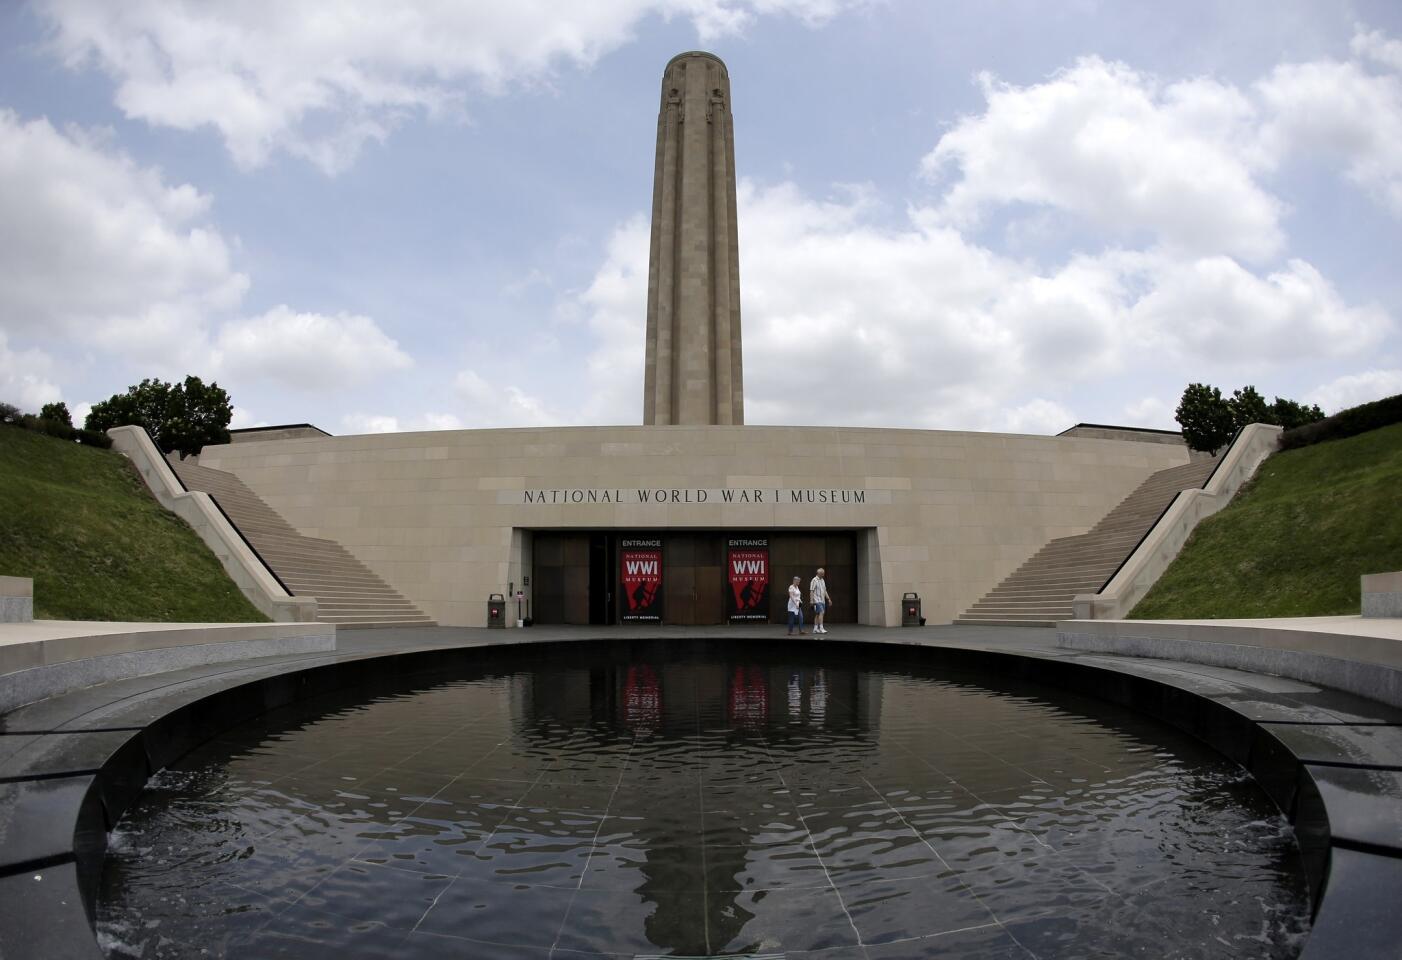 Visitors walk near a reflecting pool outside the main entrance to the National World War I Museum at Liberty Memorial in Kansas City, Mo. The museum focuses on the Great War, which started 100 years ago.